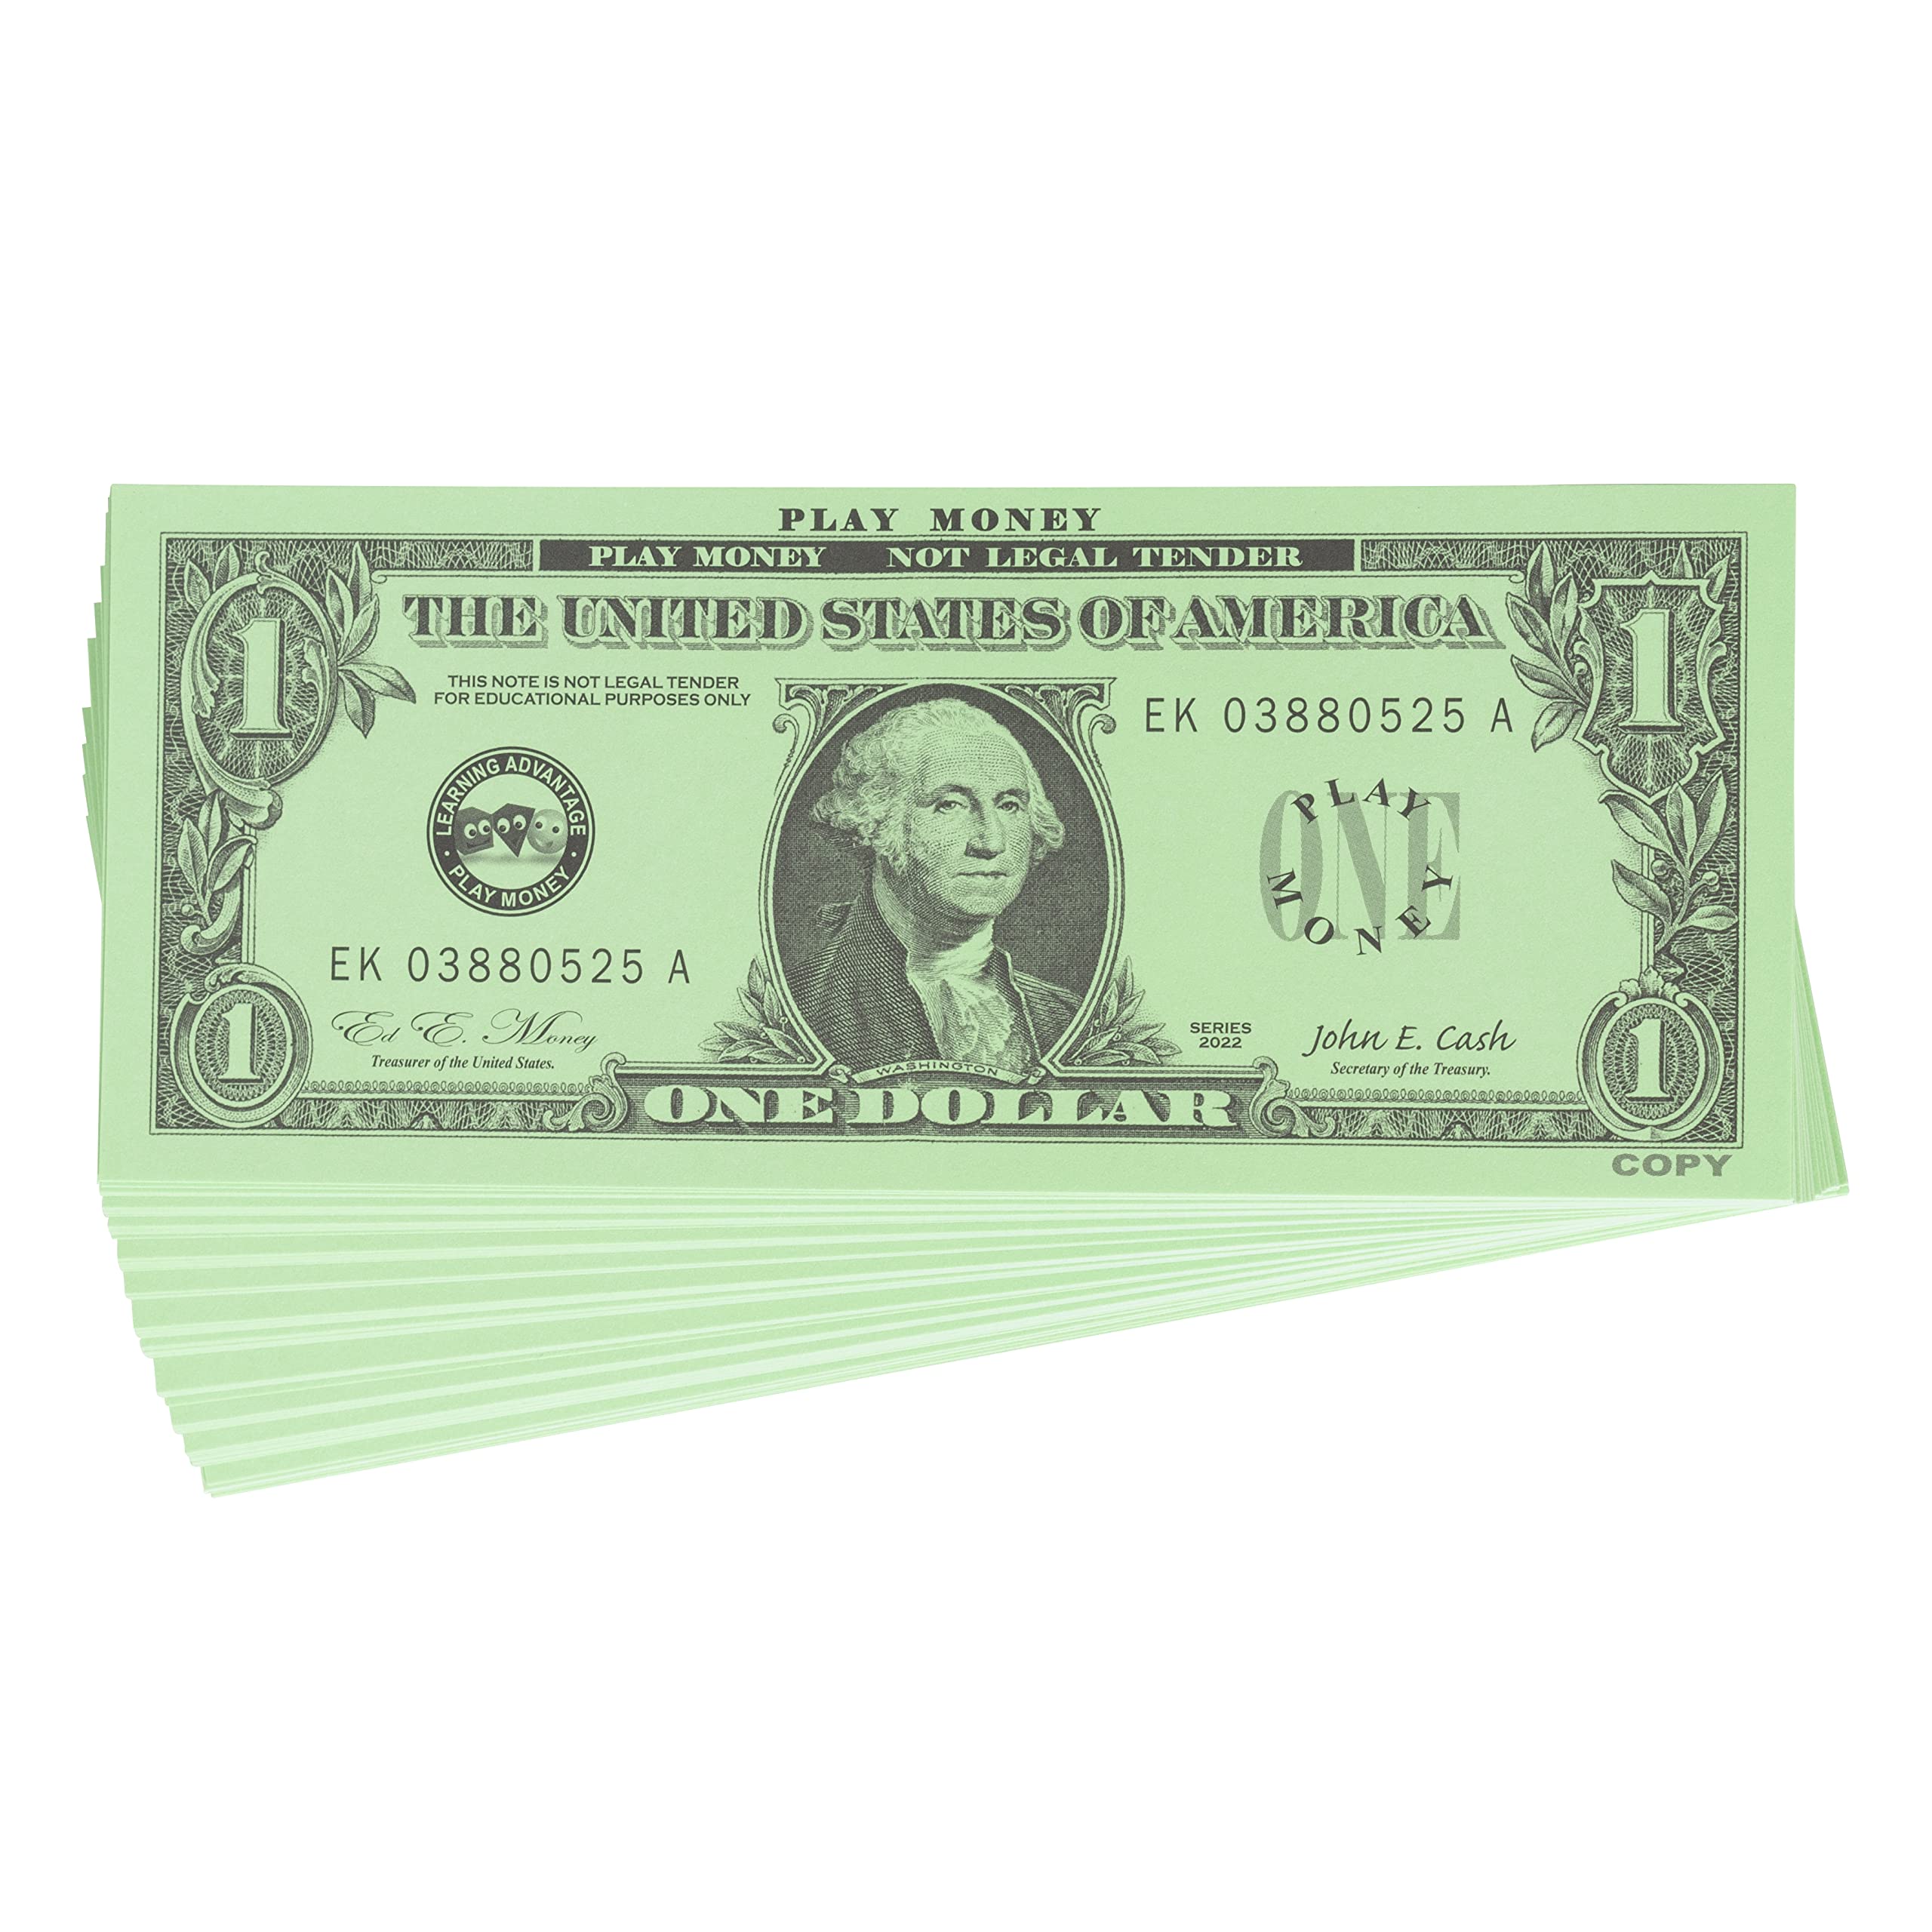 LEARNING ADVANTAGE One Dollar Play Bills - 100 $1 Paper Bills - Realistic Dollar Design and Size - Teach Currency, Counting and Math with Fake Cash